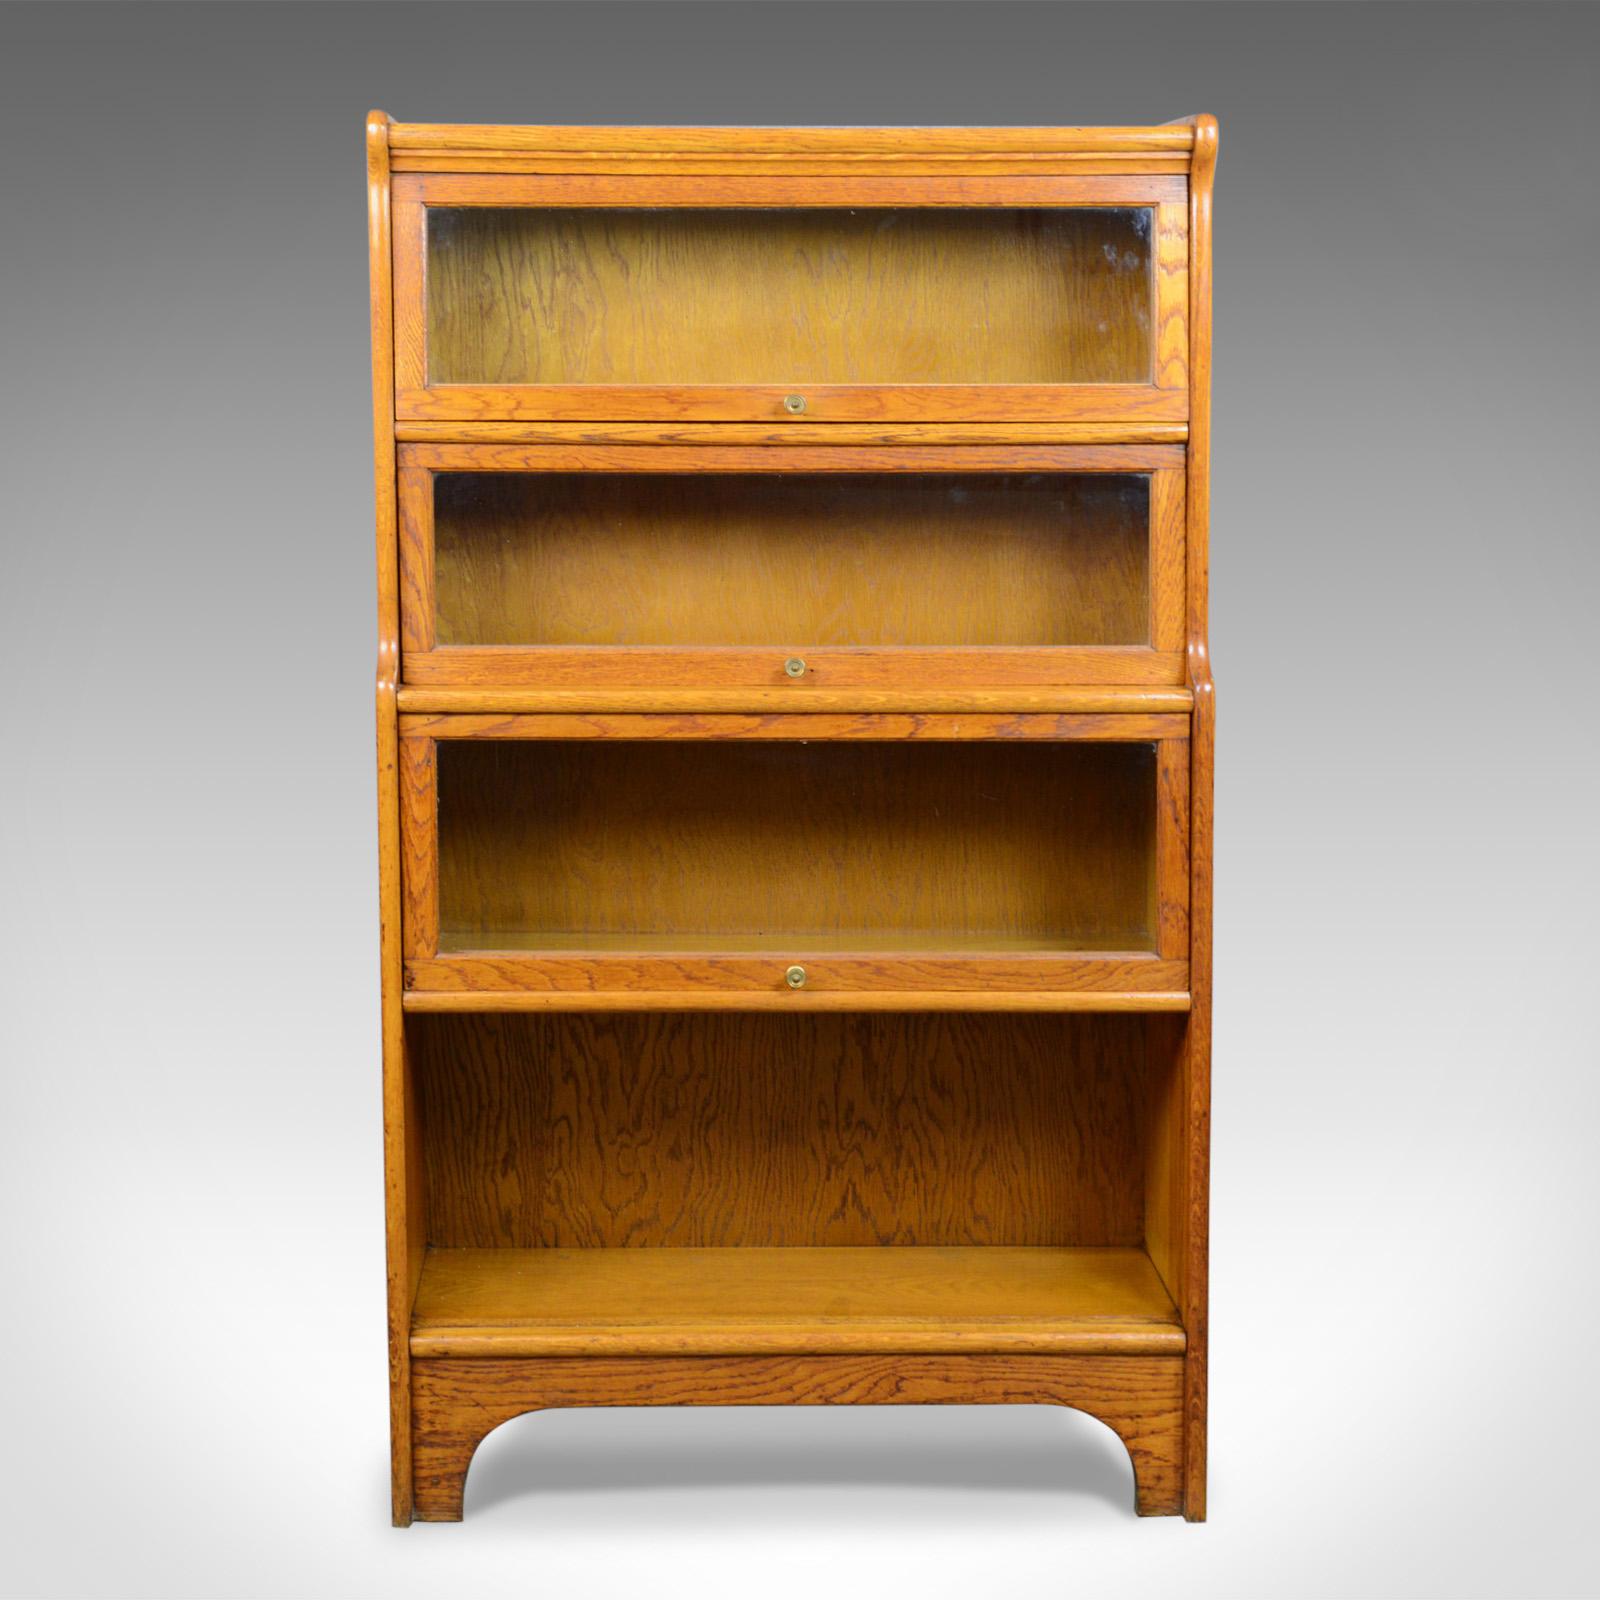 This is an antique bookcase, a four section, glazed, Globe Wernicke taste barrister's book shelf in English oak dating to the Edwardian era, circa 1910.

Oak with delicious honey tones in a wax polished finish
Grain interest throughout displaying